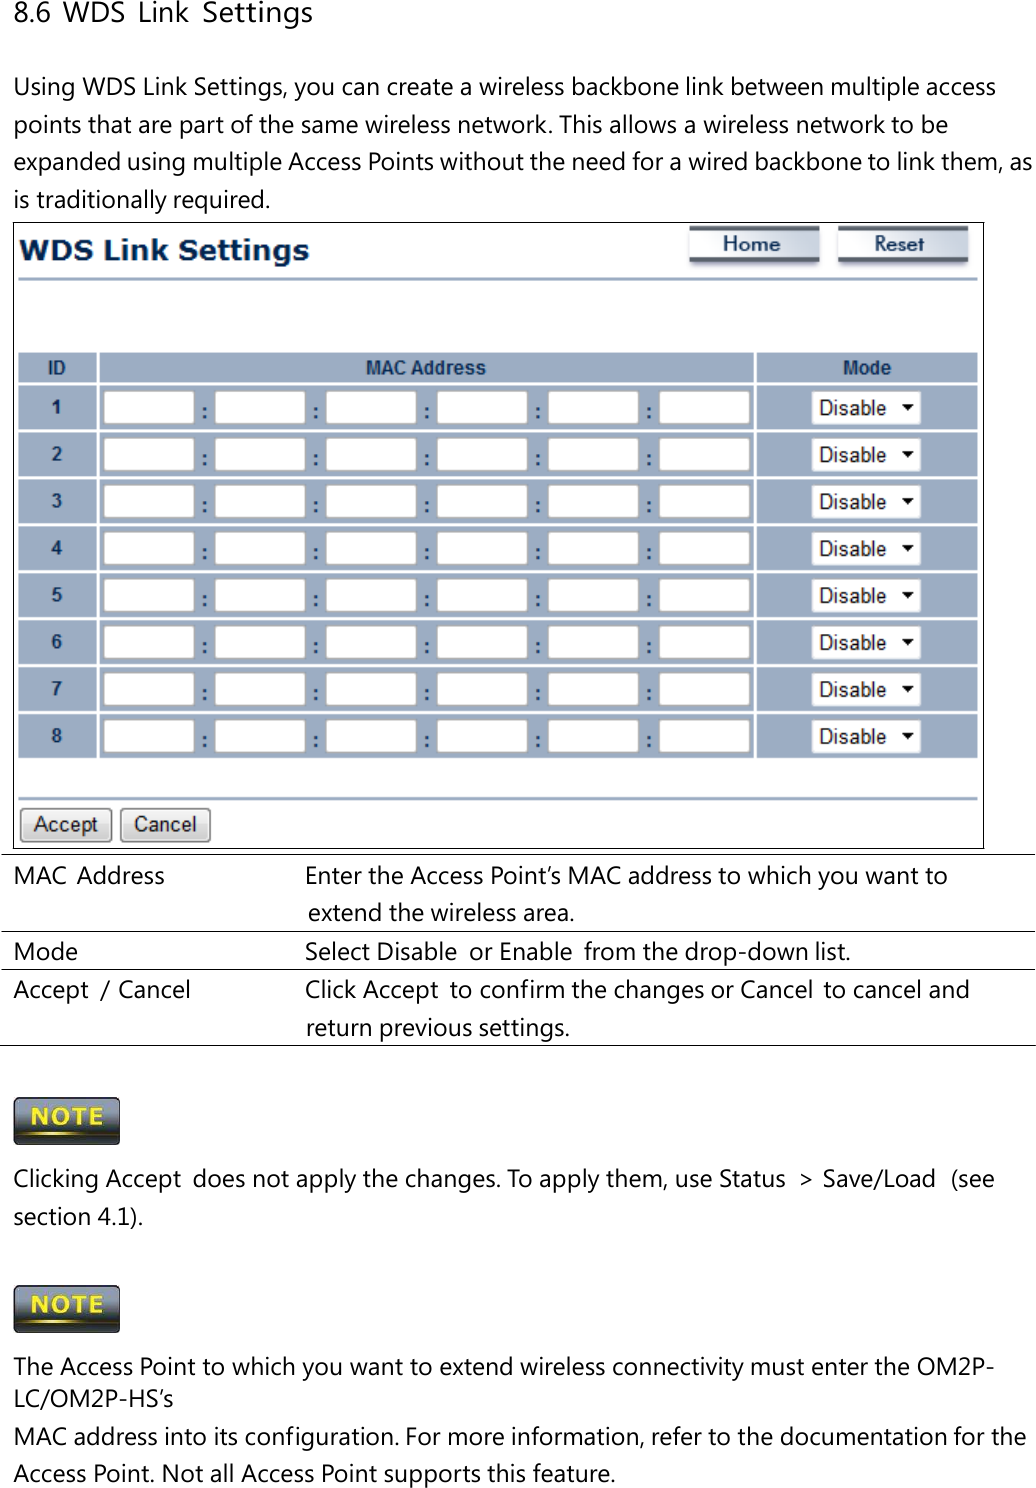 8.6 WDS Link Settings Using WDS Link Settings, you can create a wireless backbone link between multiple access points that are part of the same wireless network. This allows a wireless network to be expanded using multiple Access Points without the need for a wired backbone to link them, as is traditionally required. MAC Address   Enter the Access Point’s MAC address to which you want to extend the wireless area. Mode   Select Disable  or Enable  from the drop-down list. Accept  / Cancel   Click Accept  to confirm the changes or Cancel  to cancel and return previous settings.  Clicking Accept  does not apply the changes. To apply them, use Status  &gt; Save/Load  (see section 4.1).  The Access Point to which you want to extend wireless connectivity must enter the OM2P-LC/OM2P-HS’s MAC address into its configuration. For more information, refer to the documentation for the Access Point. Not all Access Point supports this feature. 